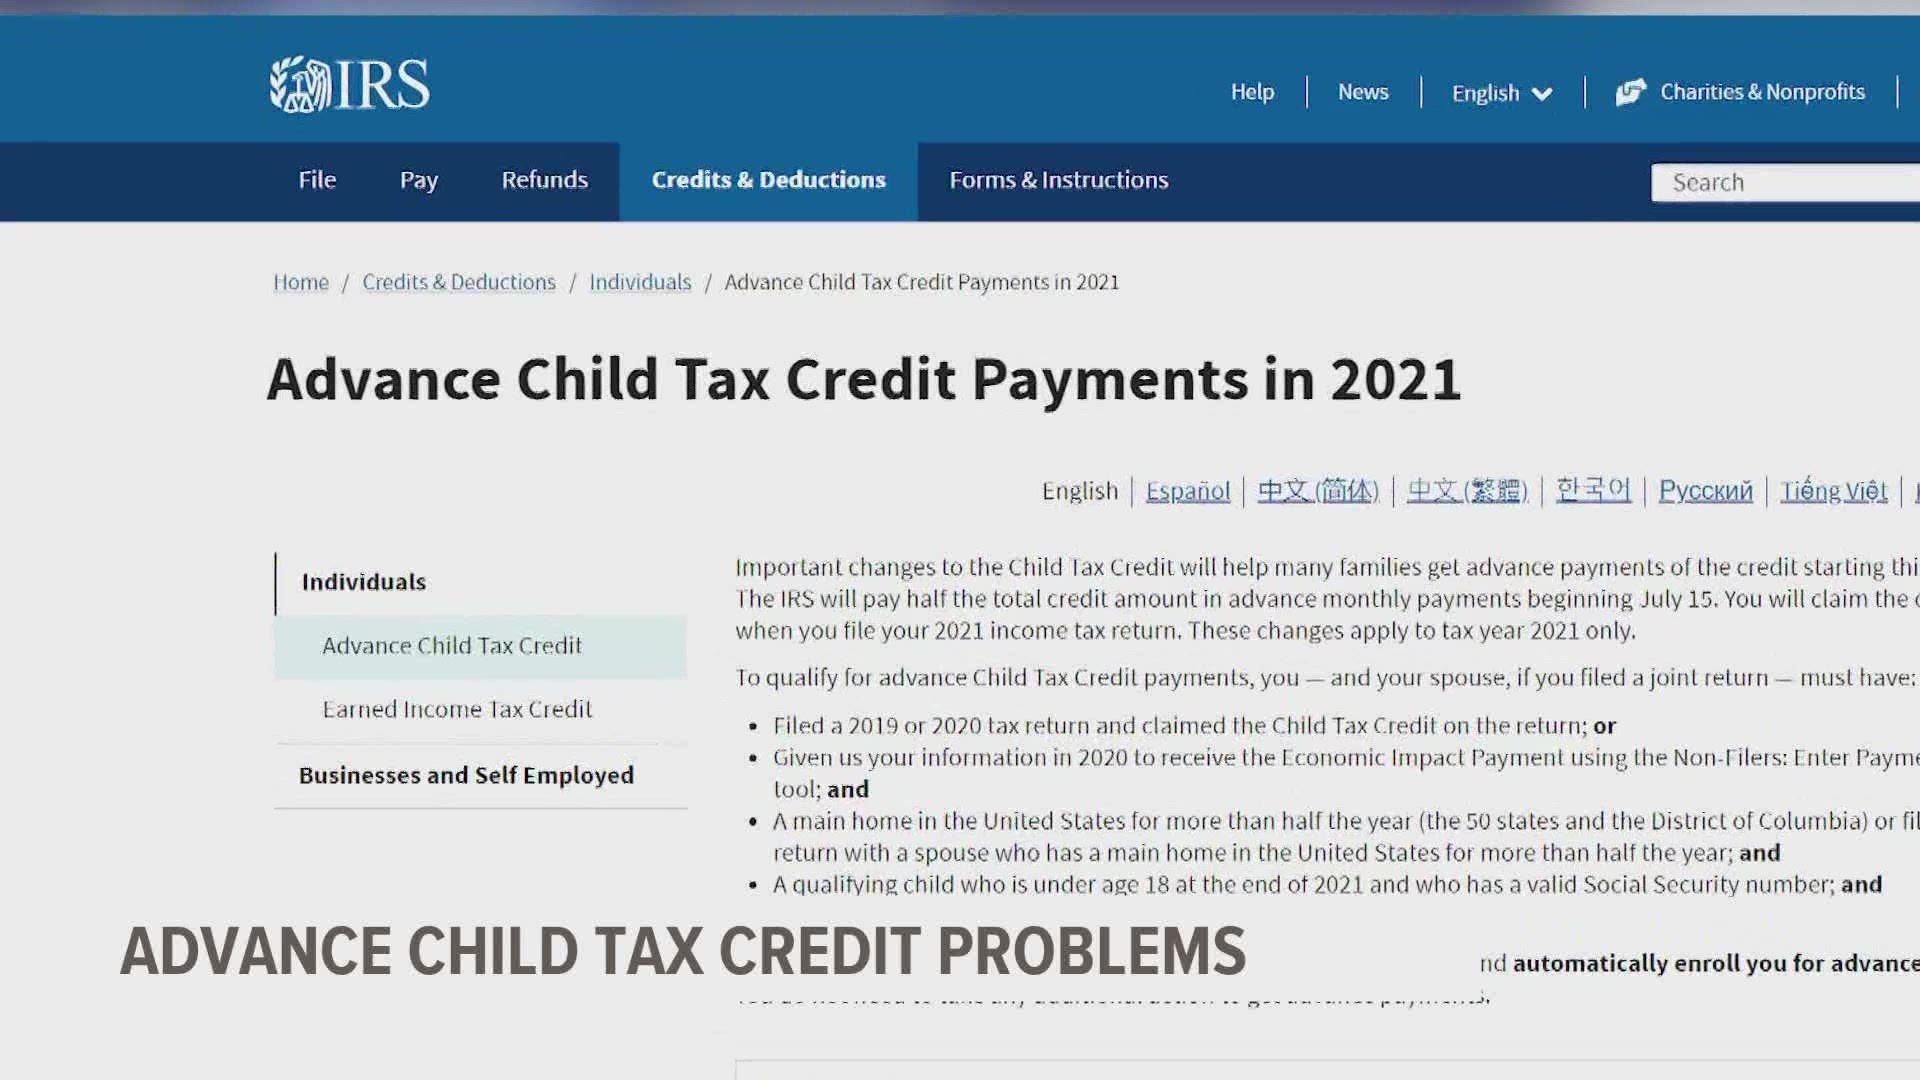 A local tax expert shares some issues people have been having with the advance child tax credit and what to look out for.